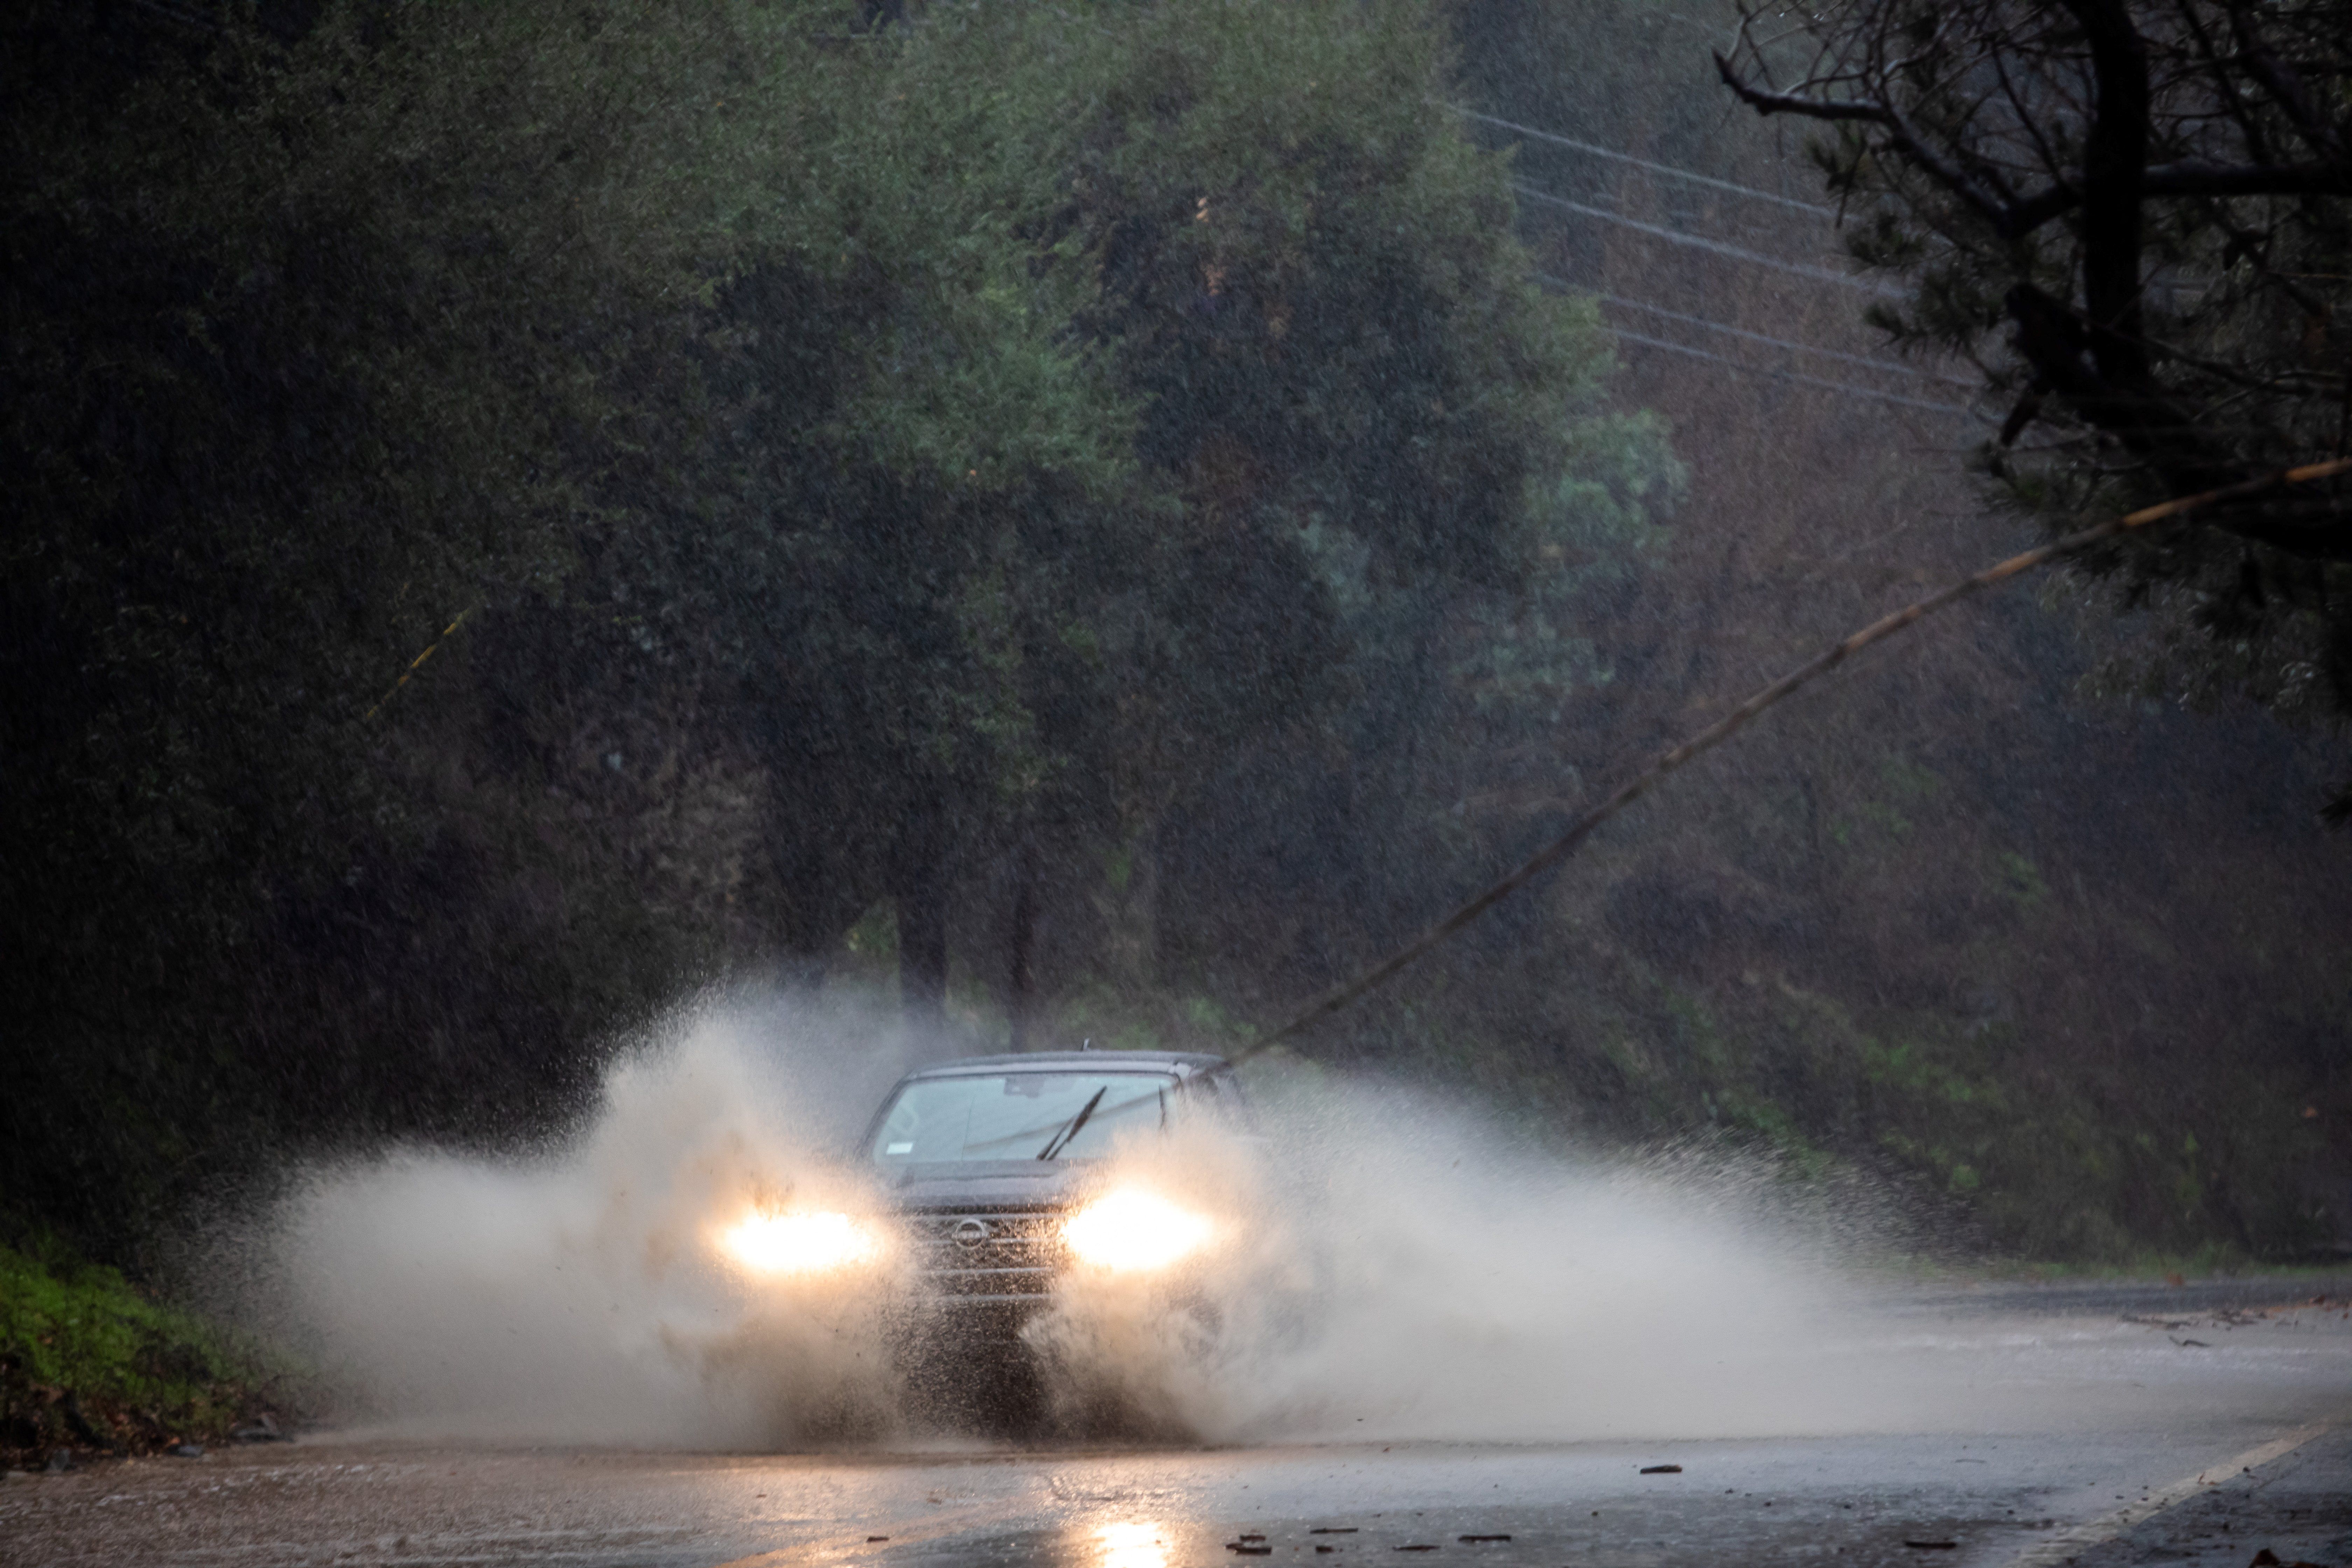 A car drives through a flooded road in Topanga, California, on February 4, 2024. The US West Coast was getting drenched on February 1 as the first of two powerful storms moved in, part of a "Pineapple Express" weather pattern that was washing out roads and sparking flood warnings. The National Weather Service said "the largest storm of the season" would likely begin on February 4.